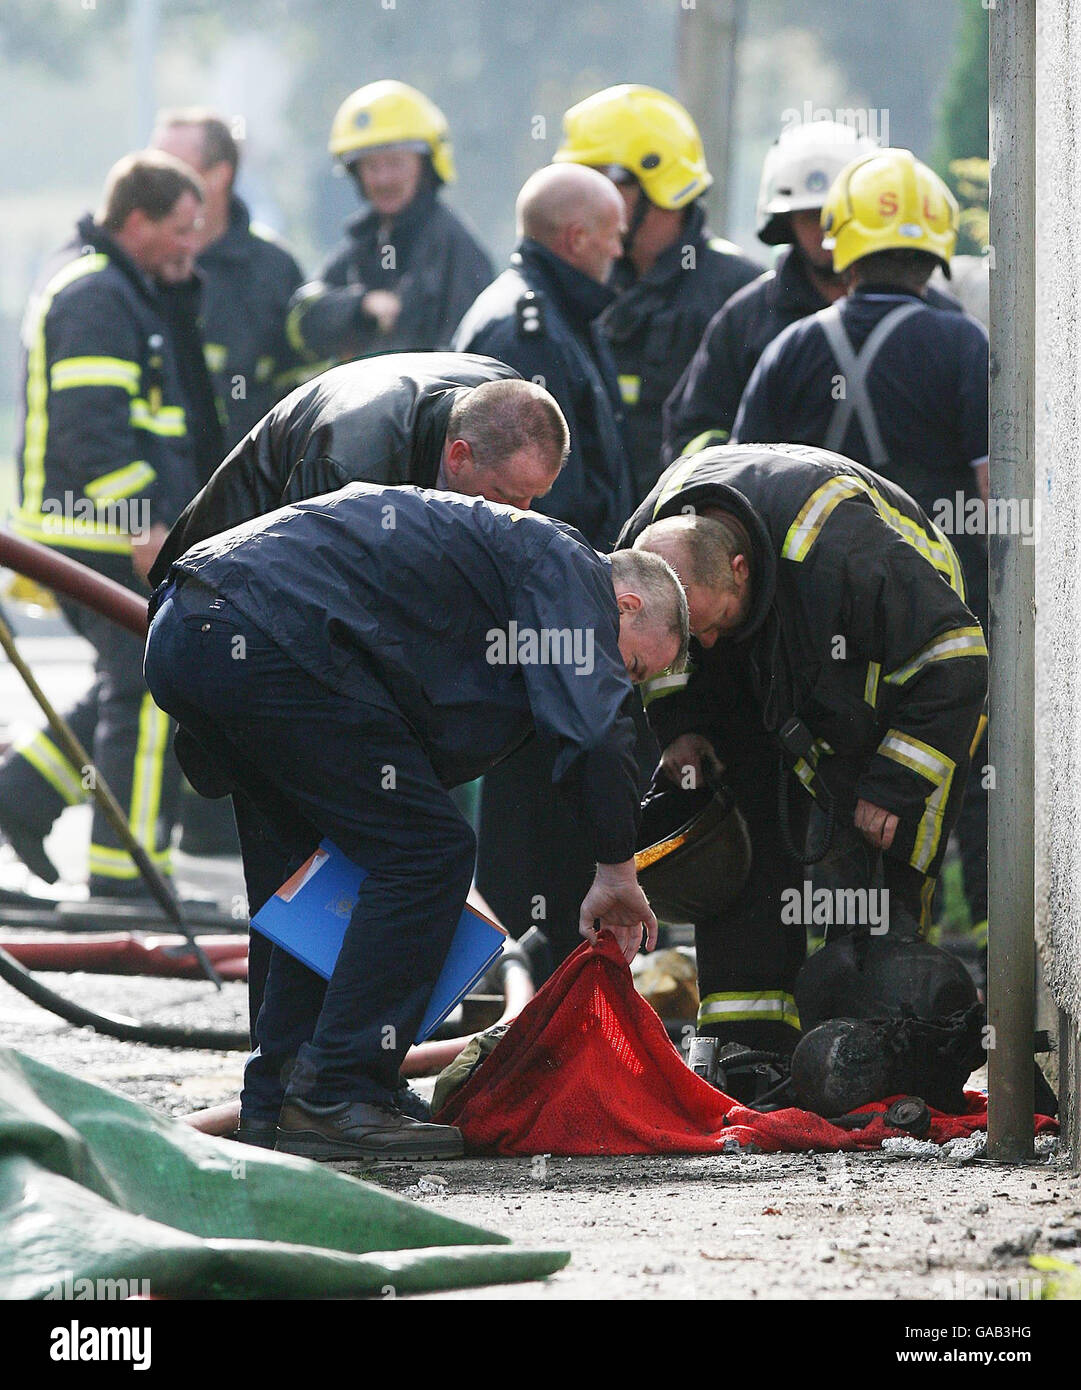 Garda investigators stand at the scene of a fire in Bray, Co Wicklow were two firefighters lost their lives today. Stock Photo